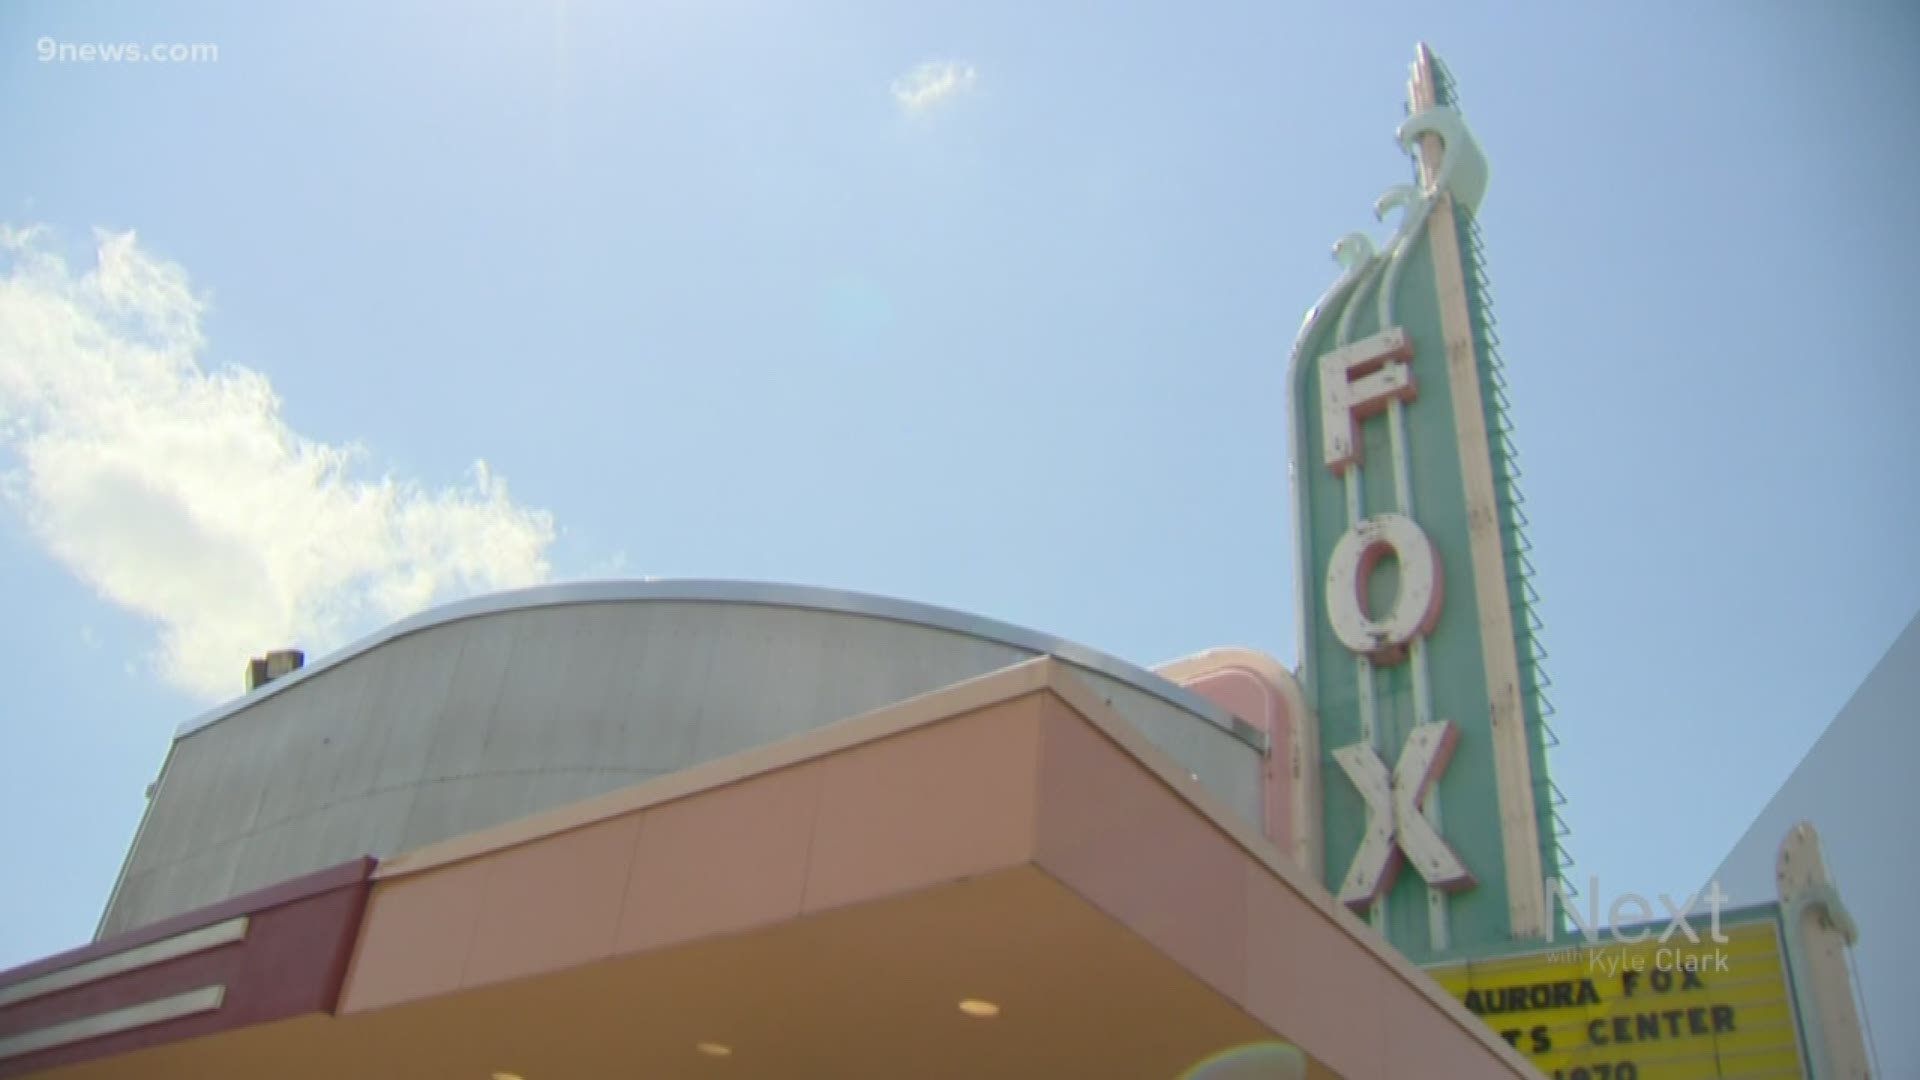 The Fox sign has had some damage over the years, and now efforts are underway to replace parts of it.